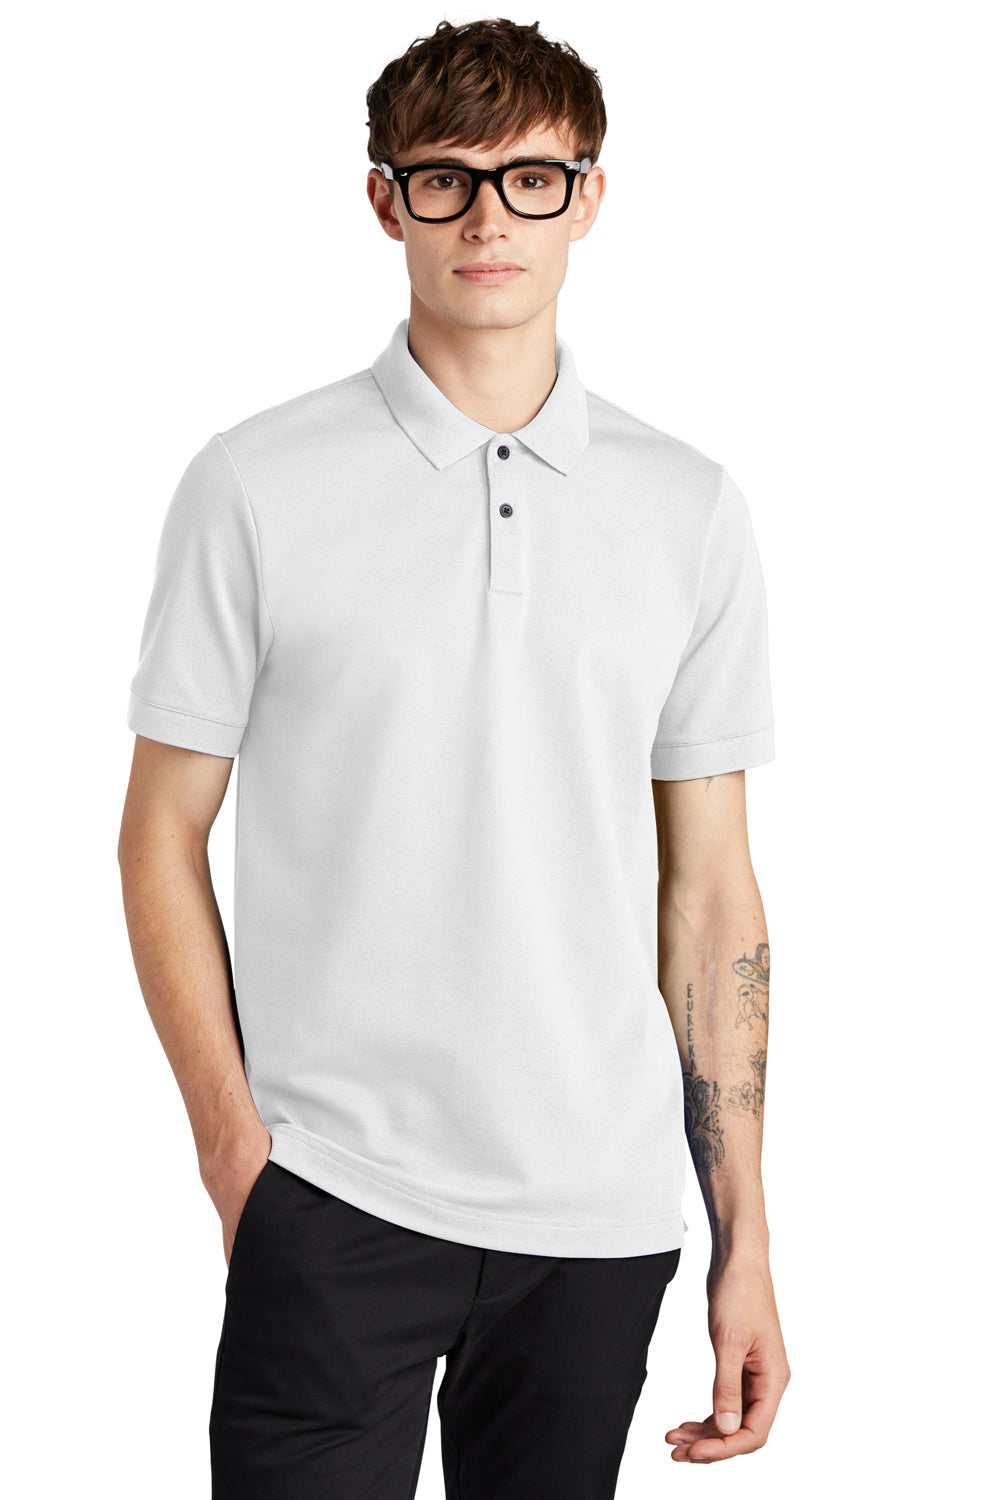 Mercer+Mettle MM1000 Stretch Pique Short Sleeve Polo Shirt White Front